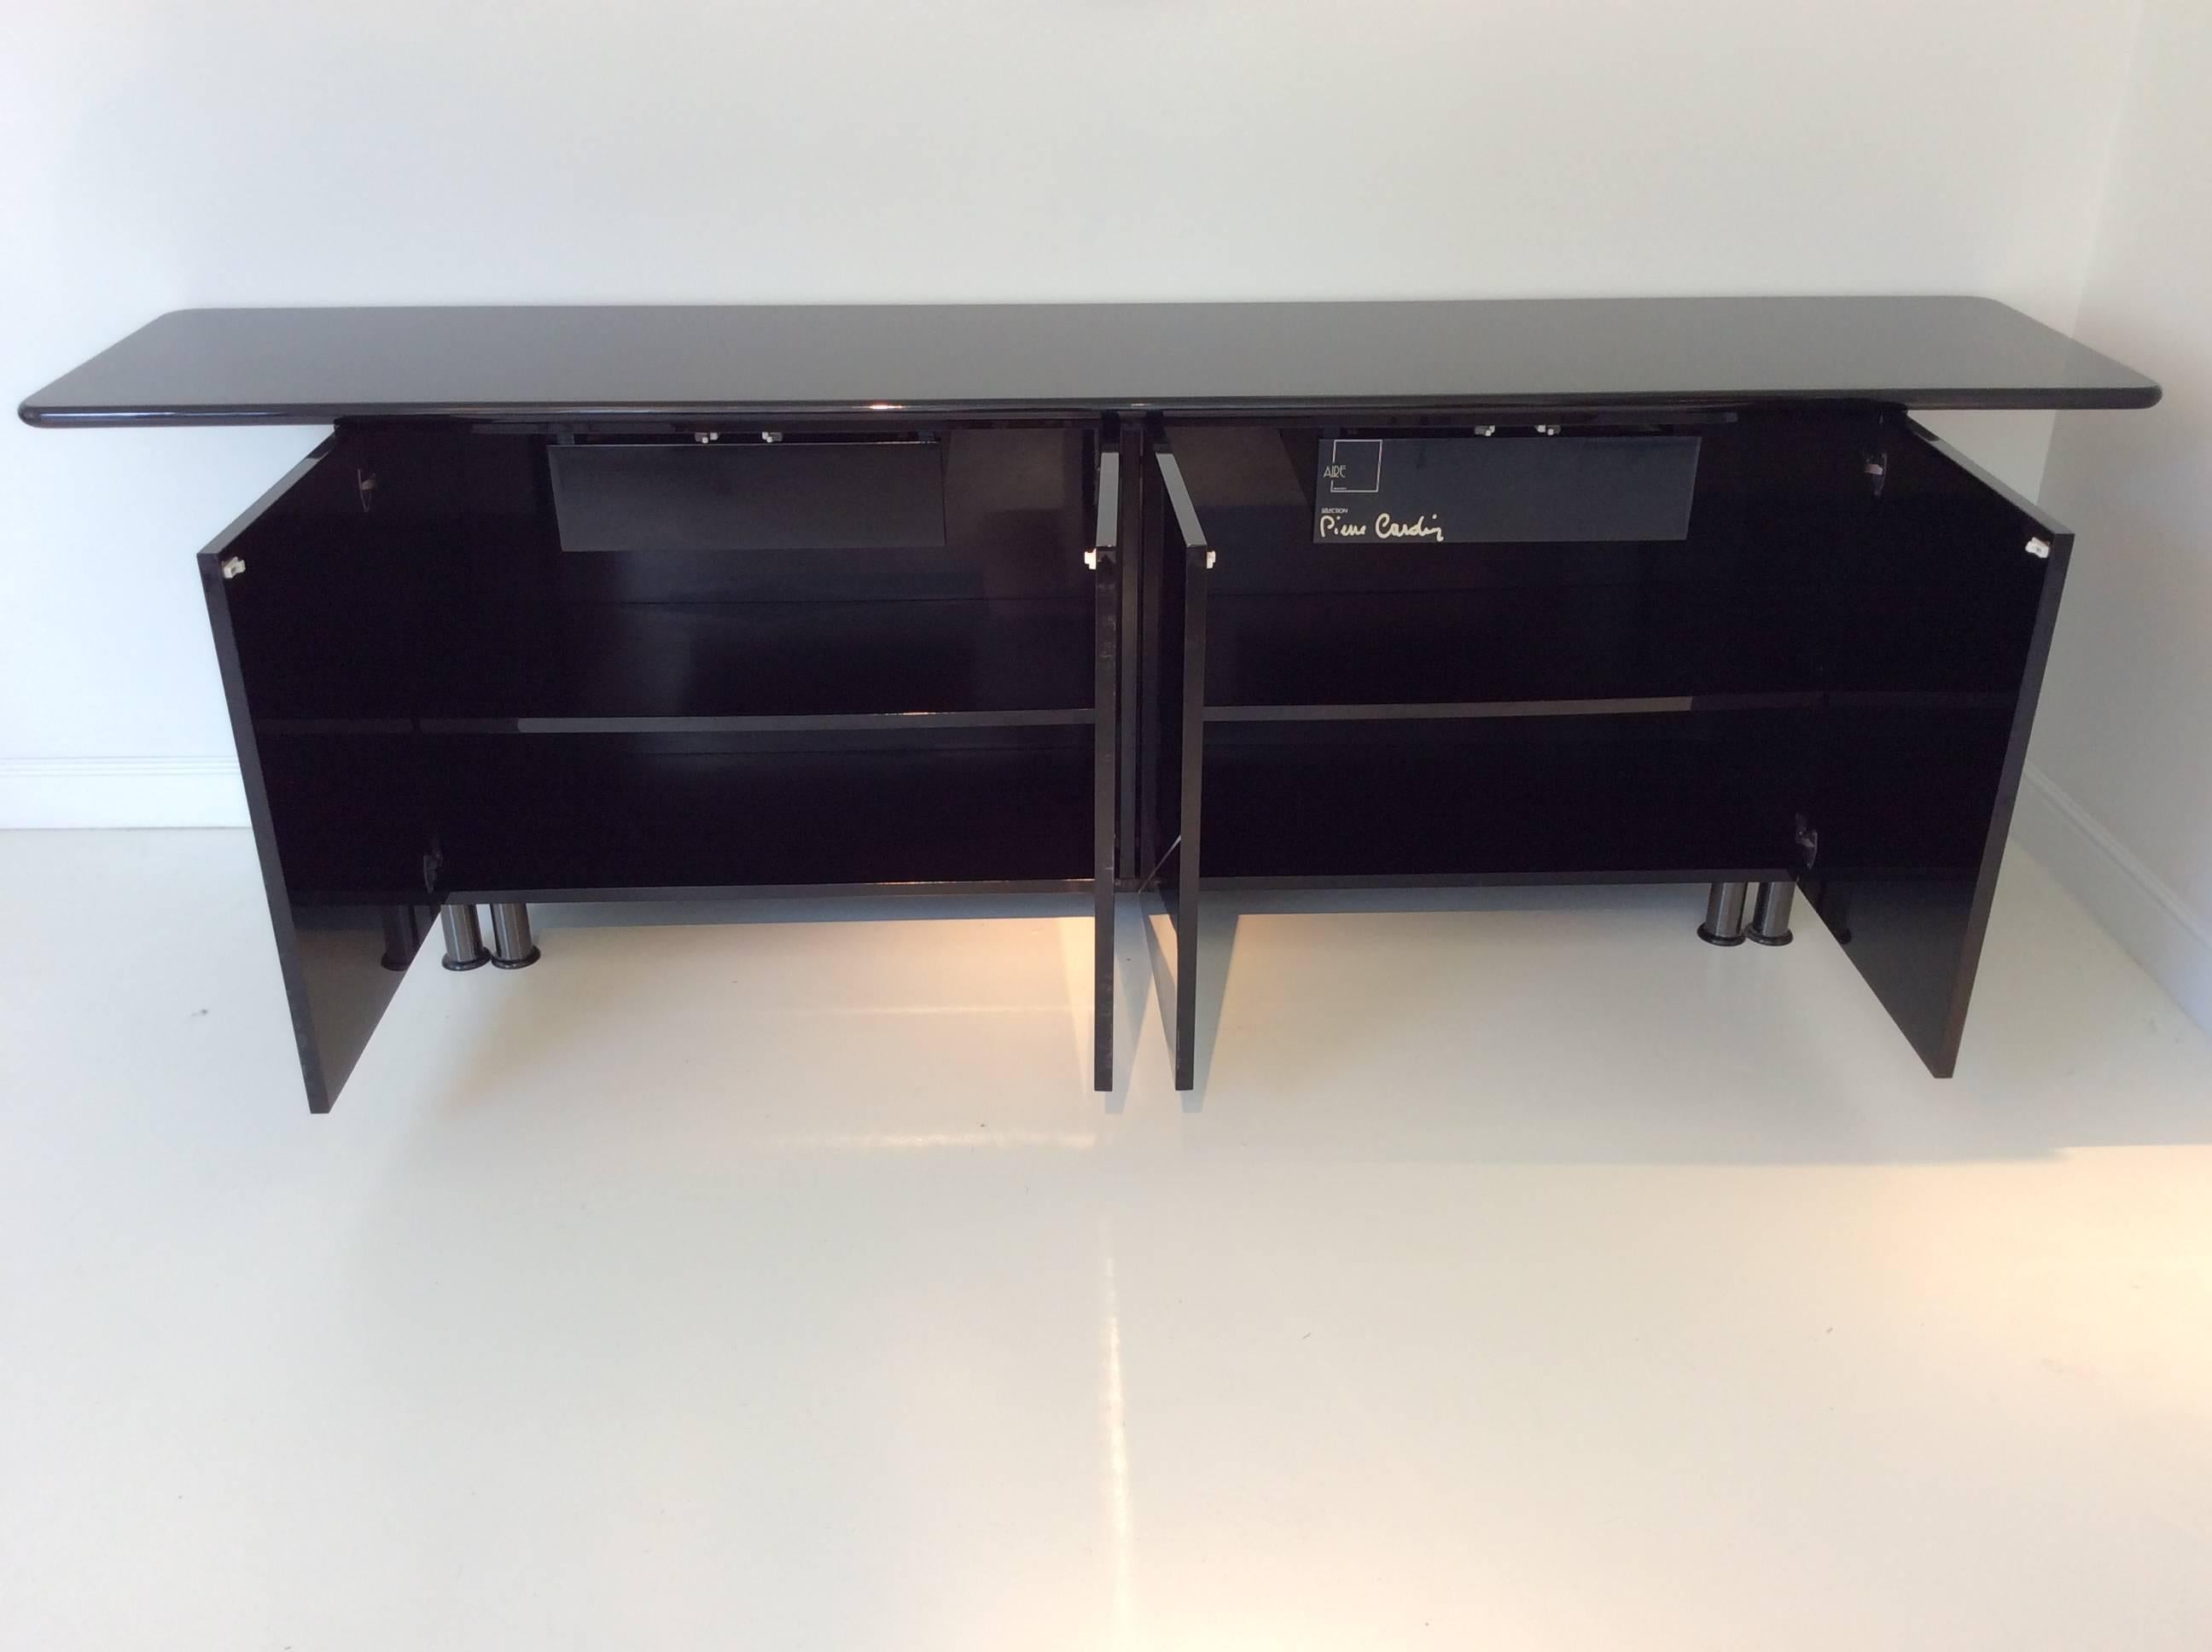 A Pierre Cardin black lacquered sideboard, circa 1980, France.
Four doors, two drawers.
Monogrammed on the right door and signed on a drawer inside.
Measures: W: 270 cm, H: 85cm, D: 55 cm.
Good original condition with some minor scratches of use.